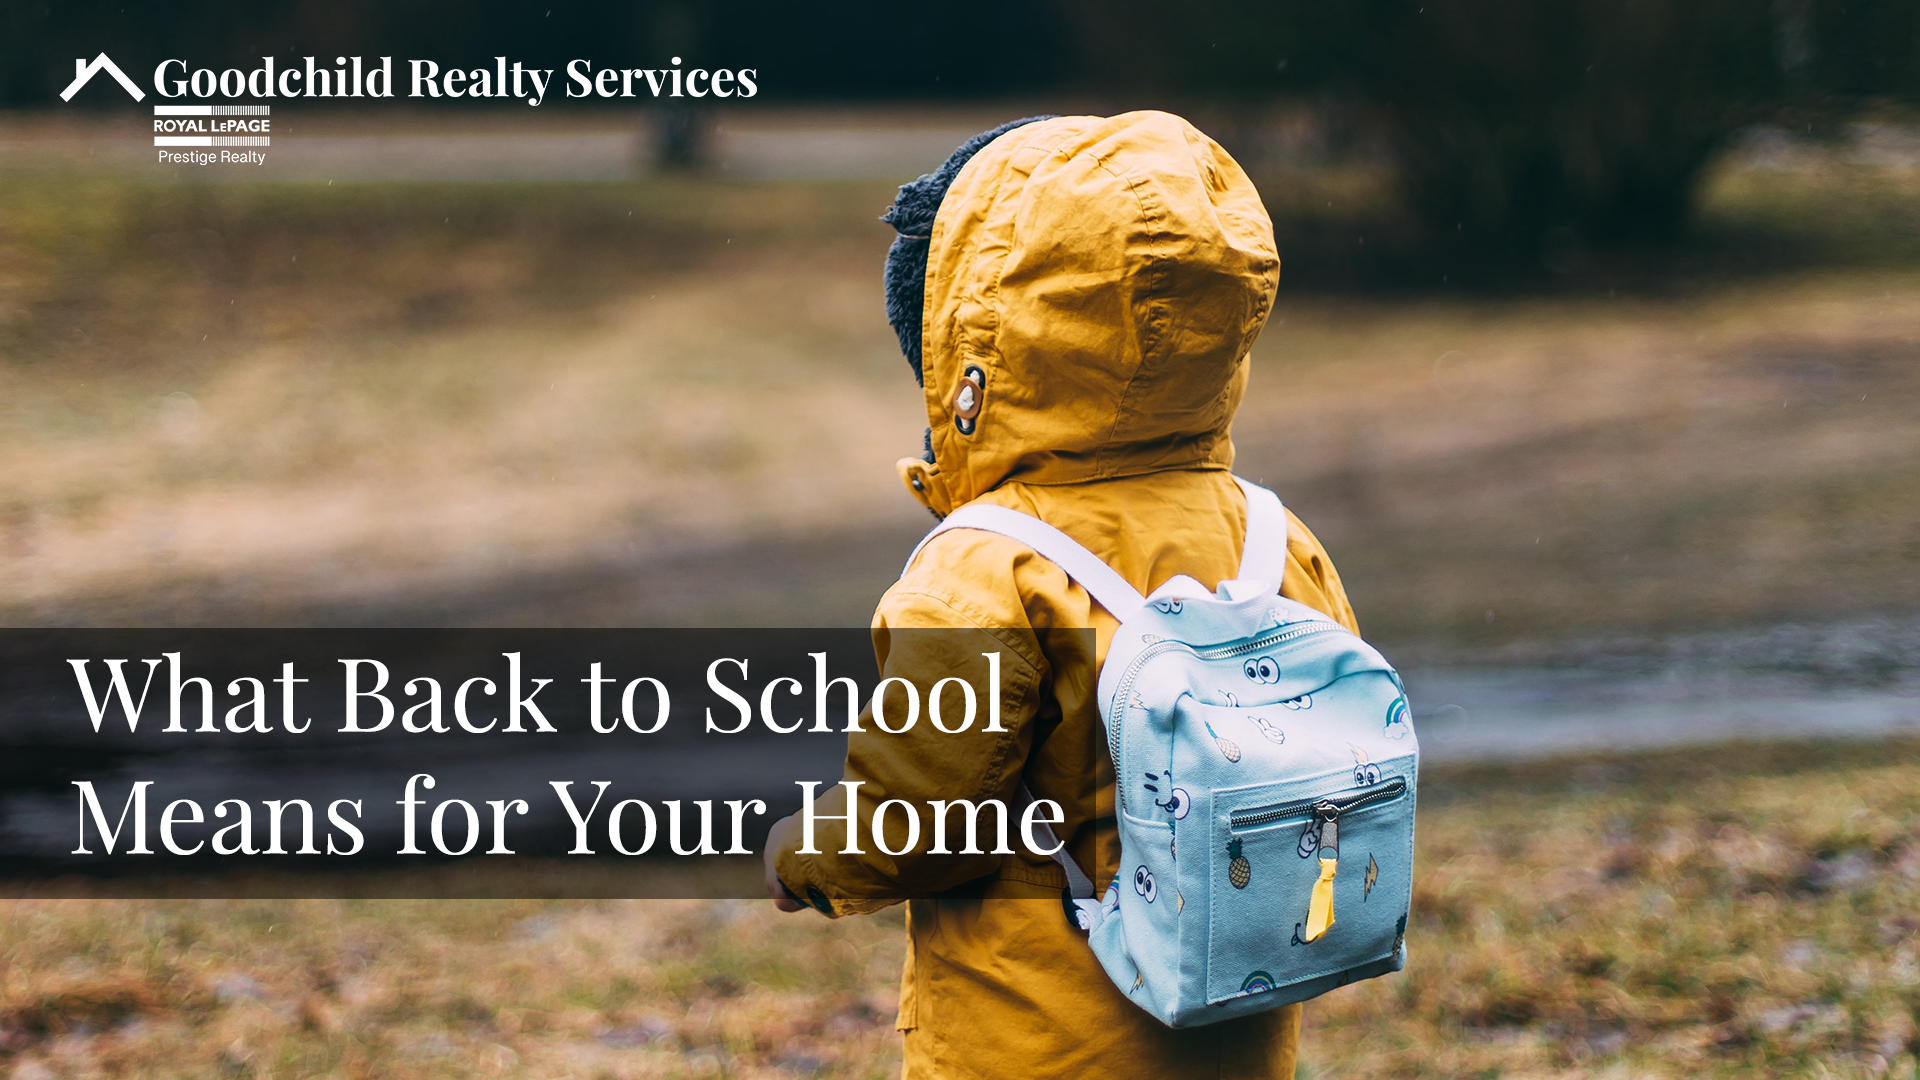 What Back to School Means for Your Home